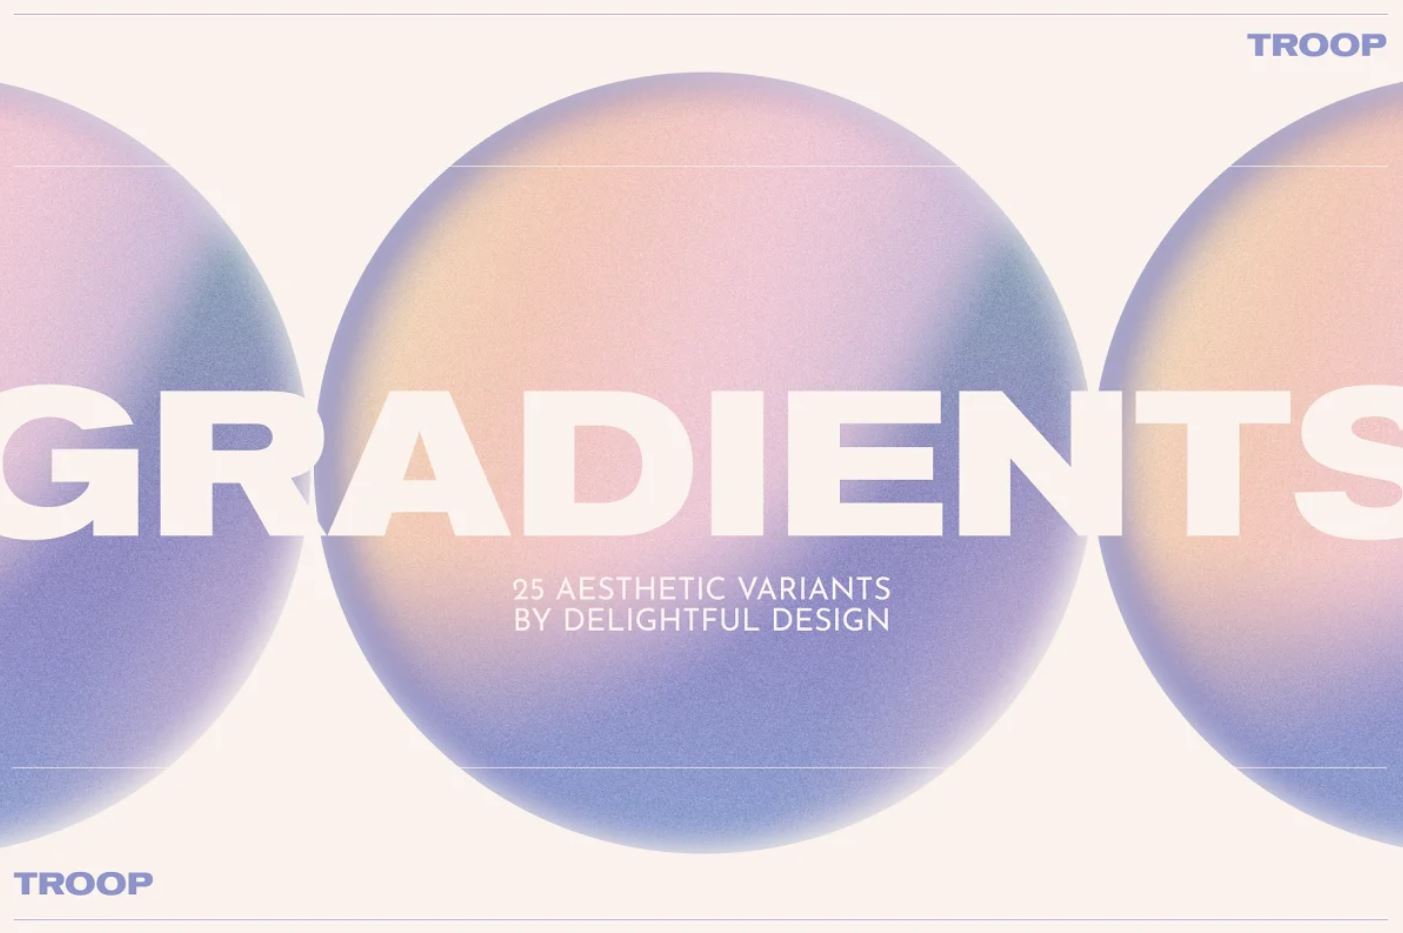 Gritty color gradients with aesthetic variations